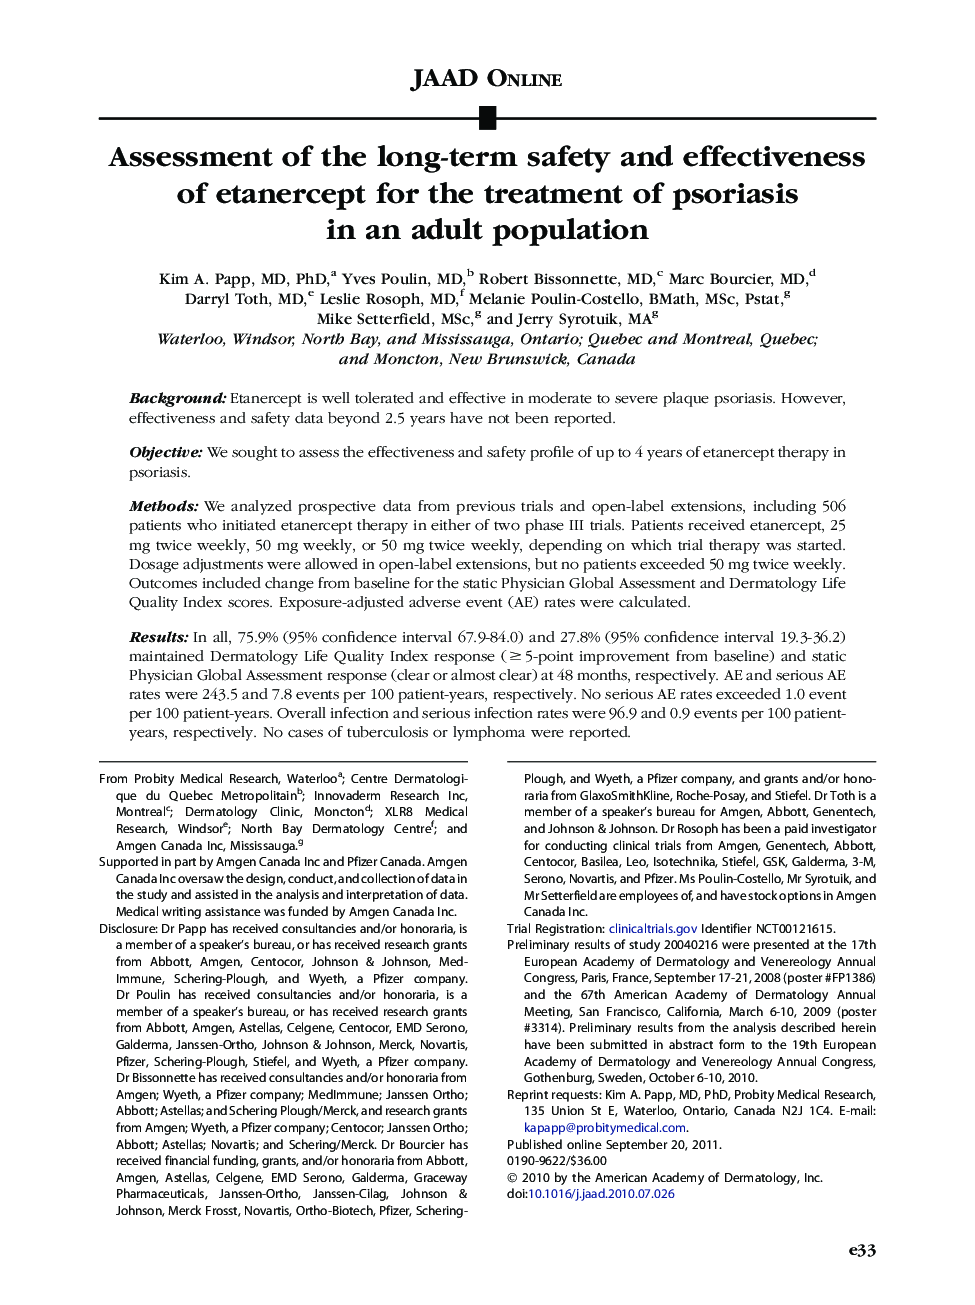 JAAD onlineAssessment of the long-term safety and effectiveness of etanercept for the treatment of psoriasis in an adult population